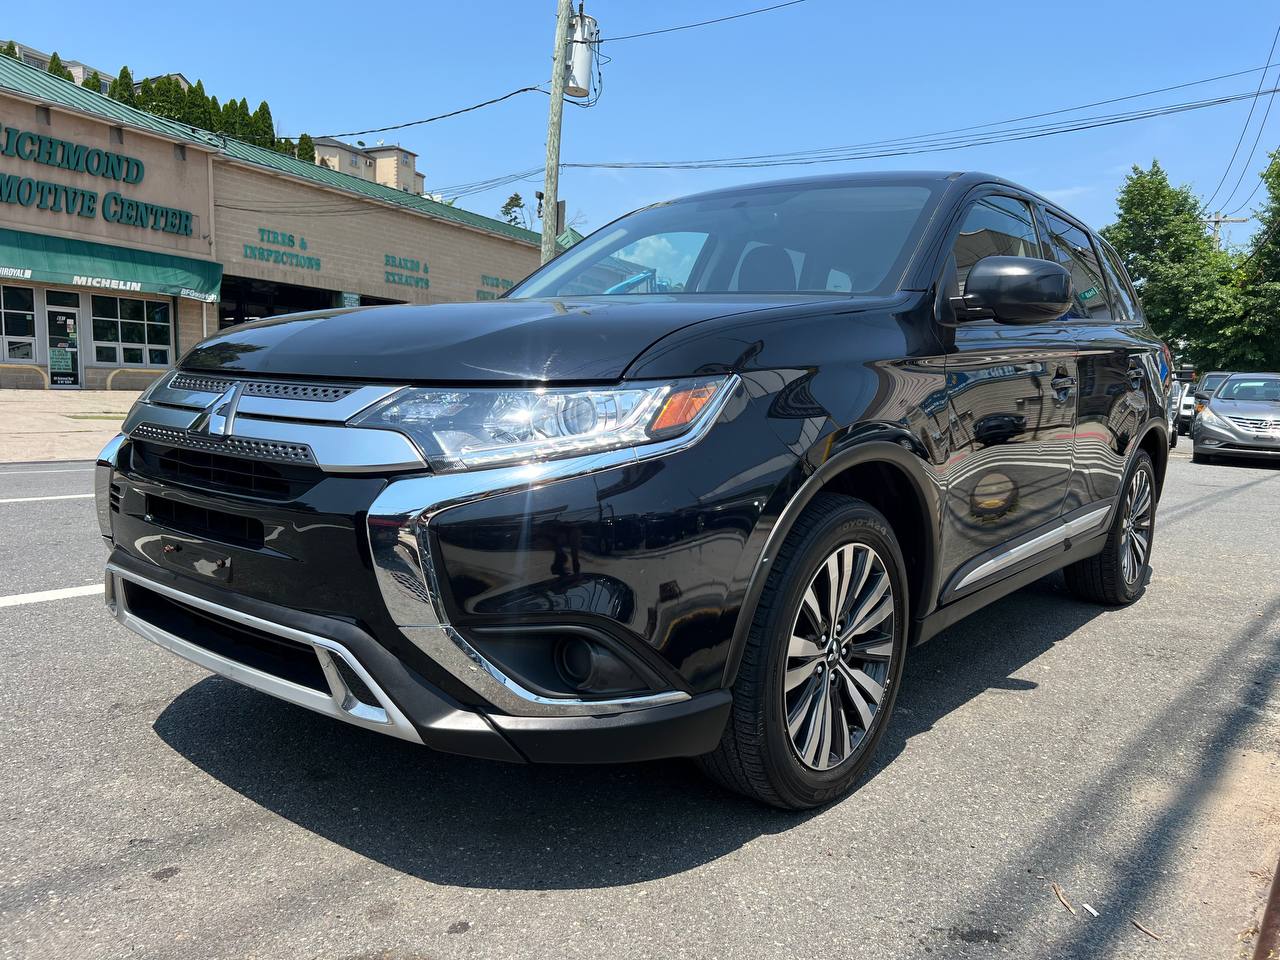 Used Car - 2020 Mitsubishi Outlander ES for Sale in Staten Island, NY